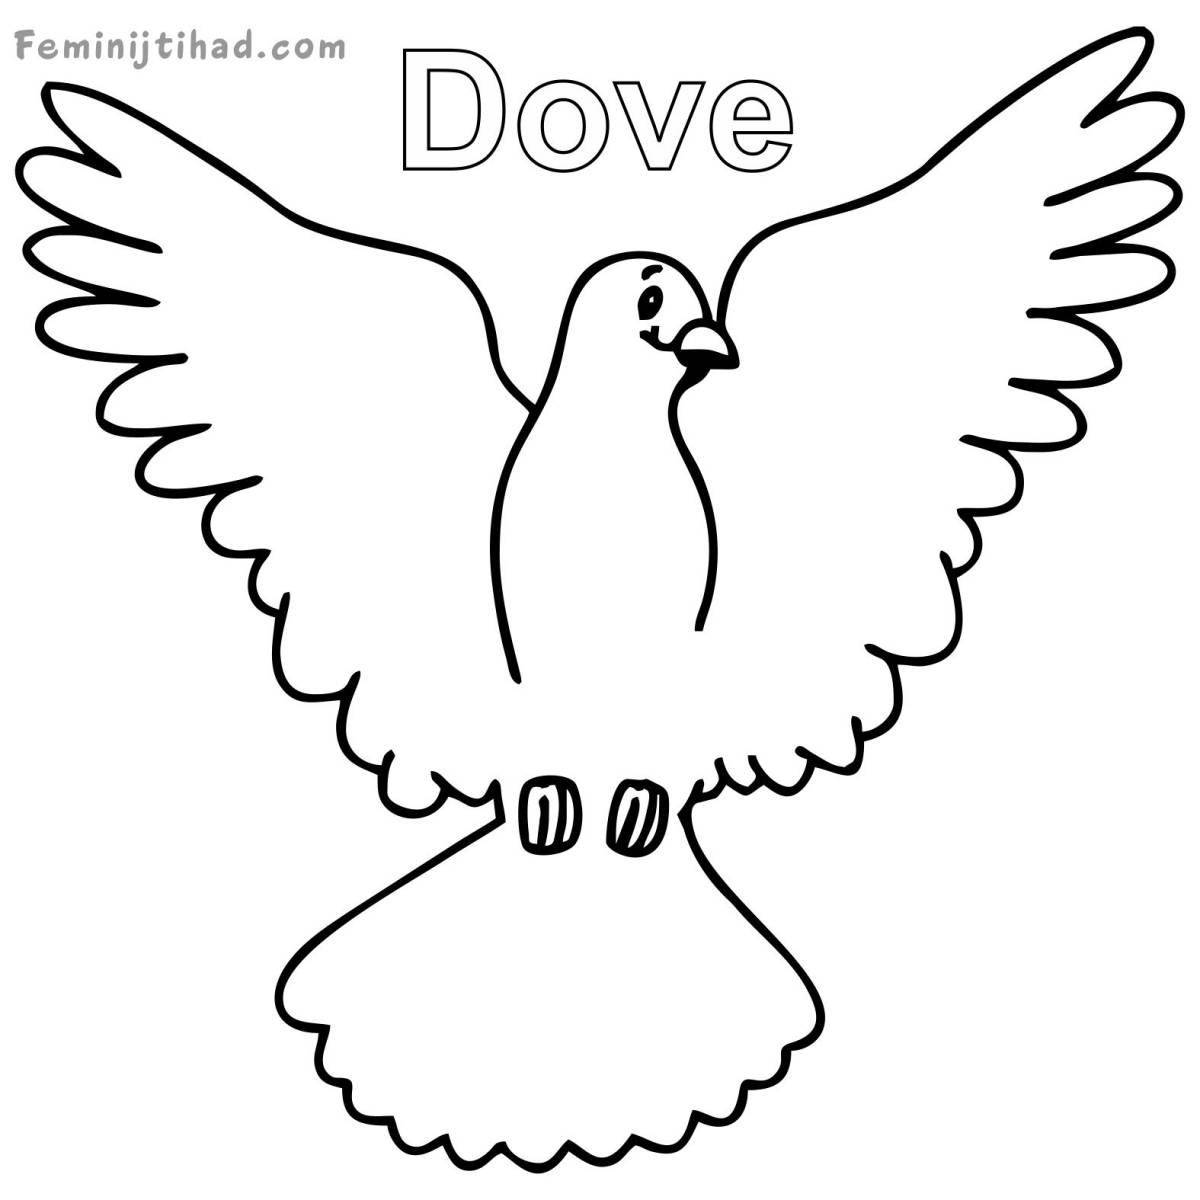 Playful coloring dove for children 3-4 years old